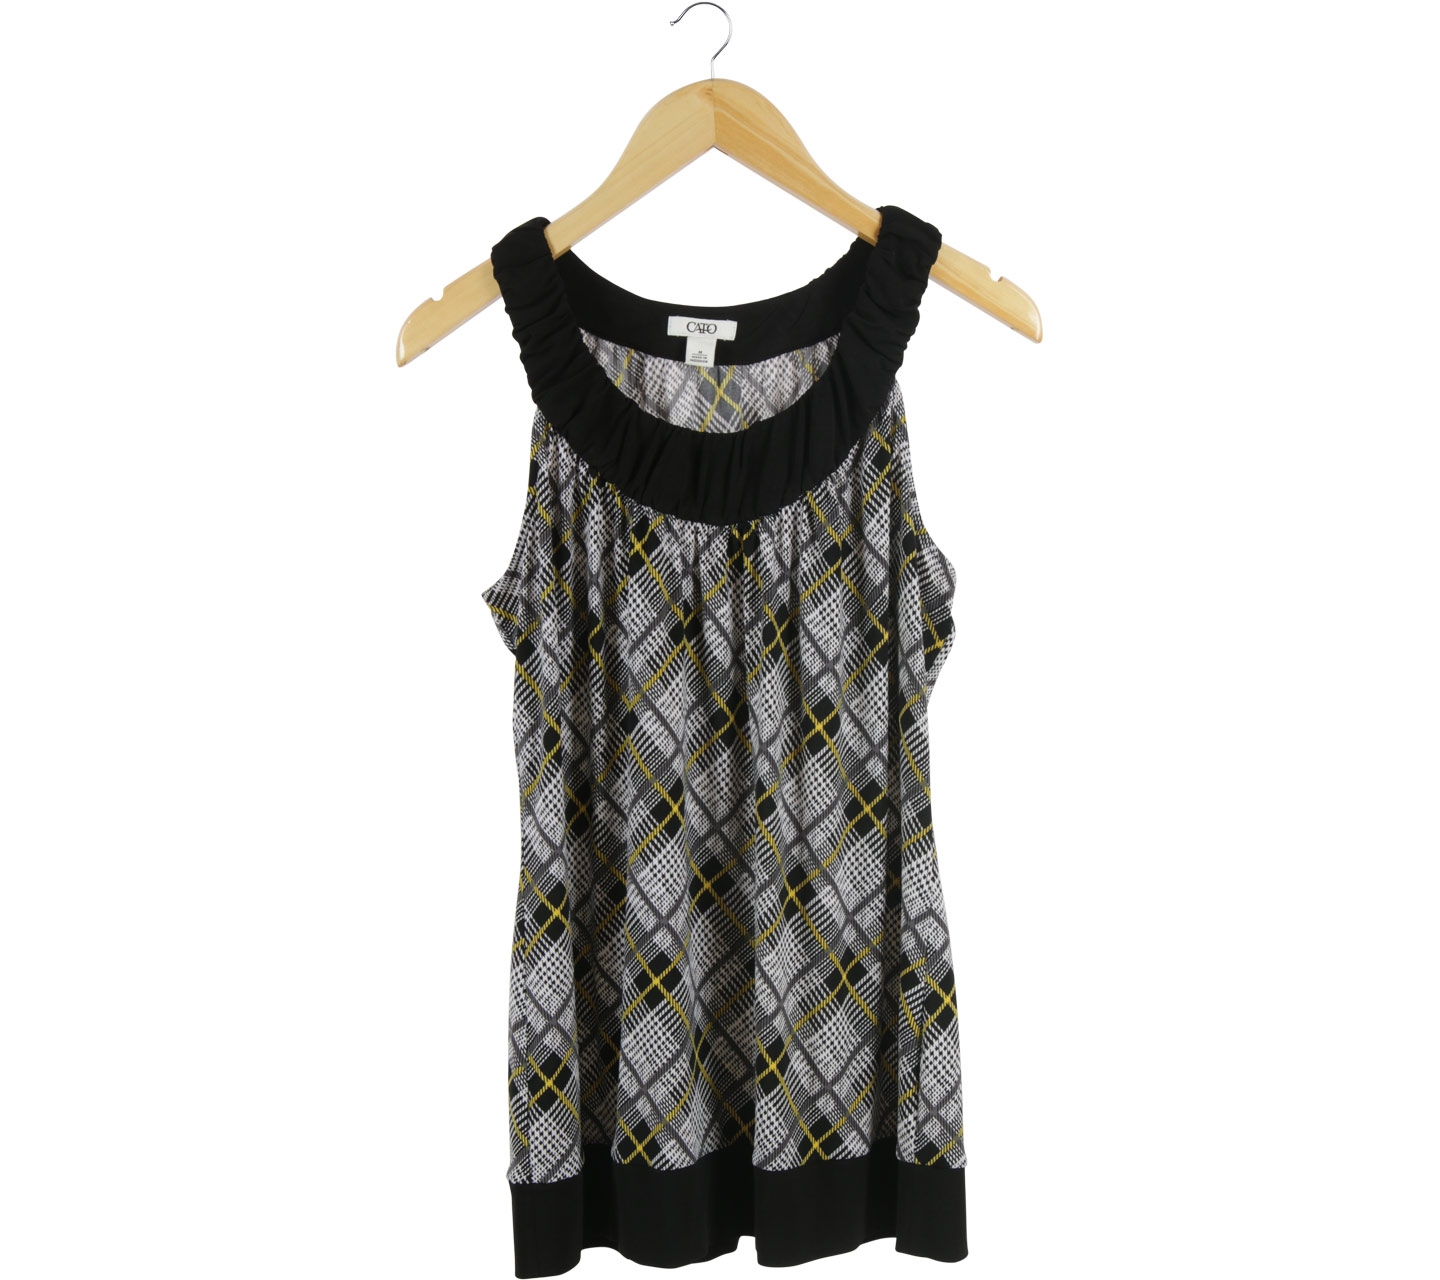 Cato Multi Colour Patterned Sleeveless